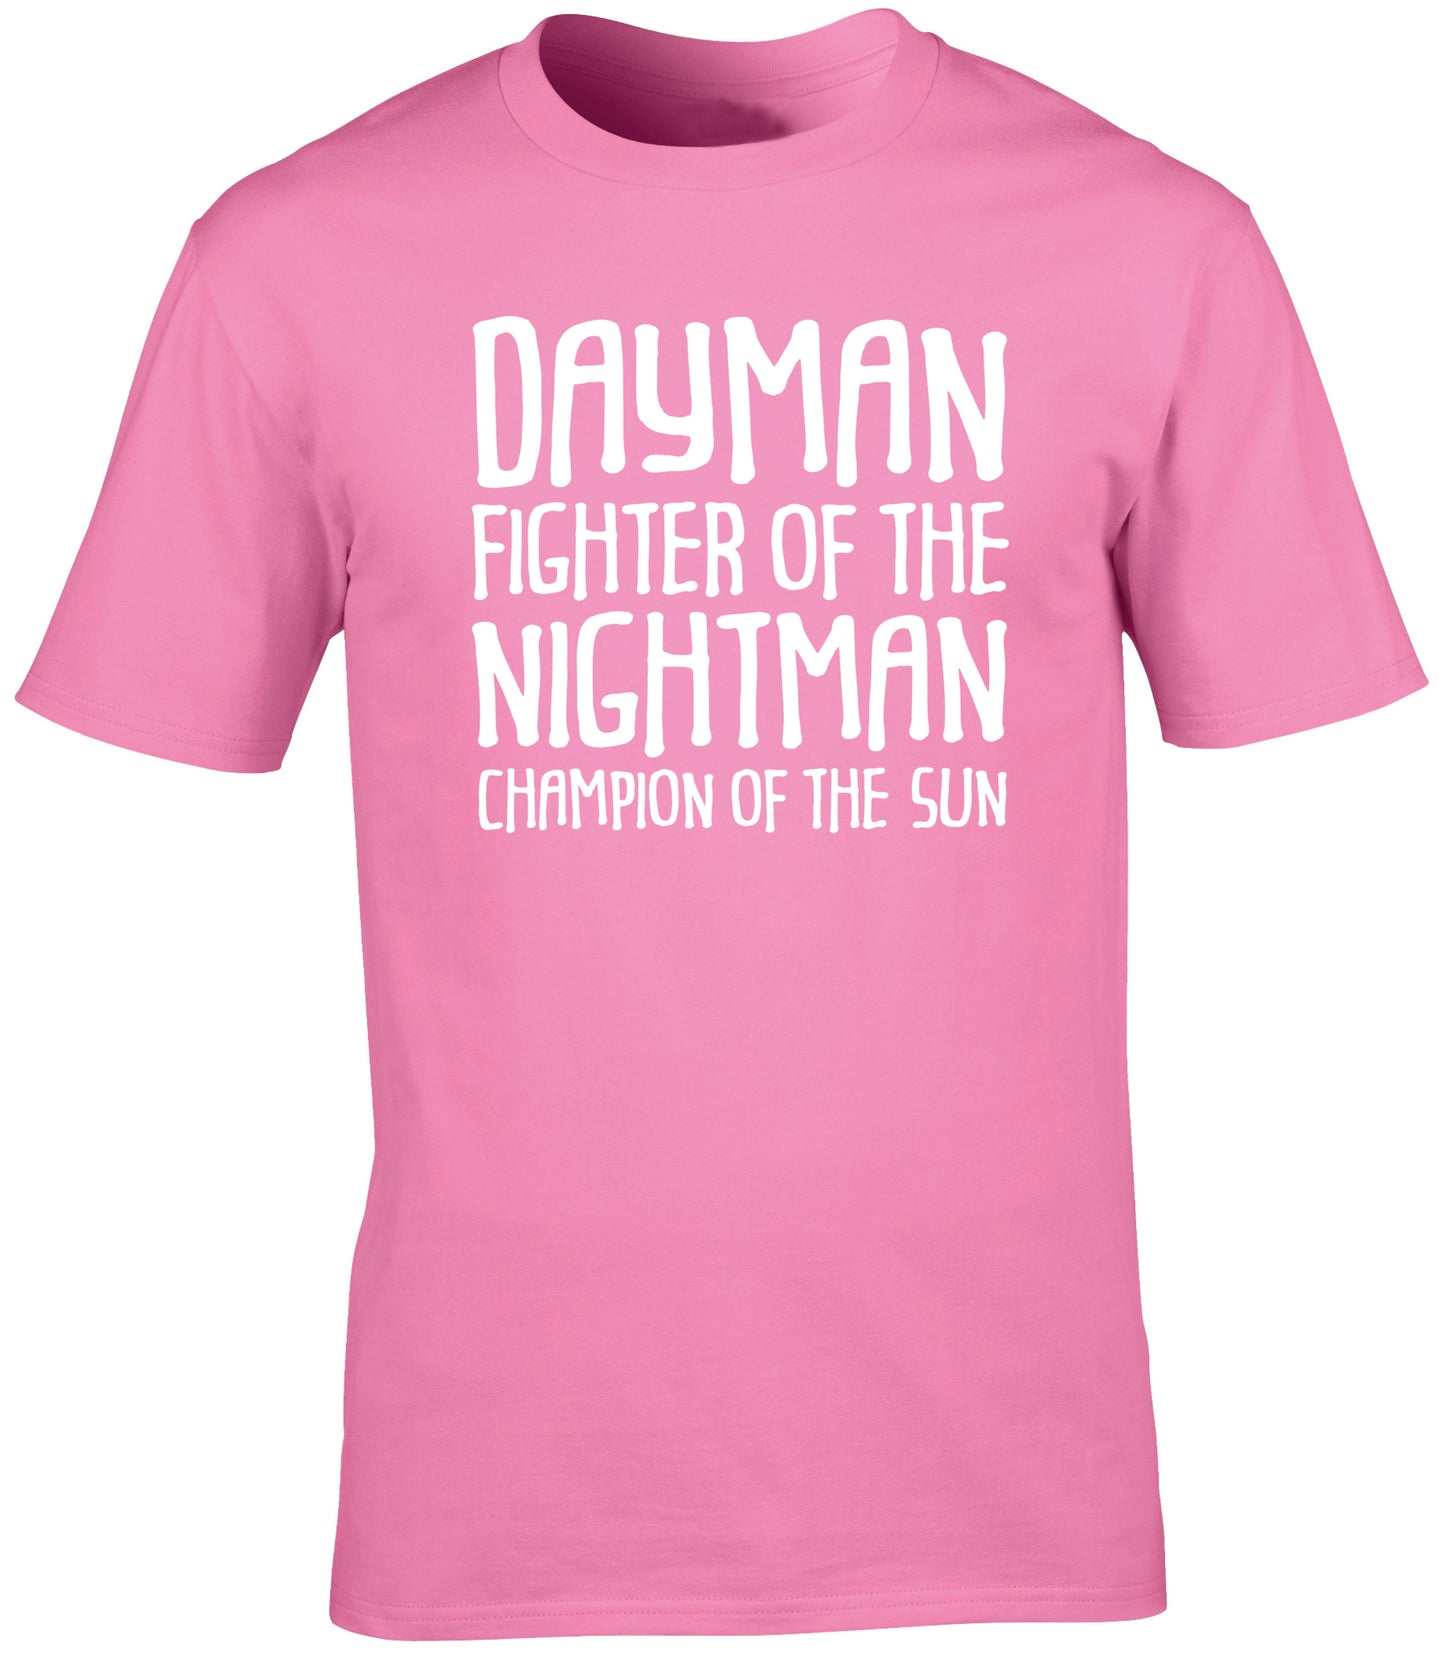 Dayman fighter of the nightman champion of the sun unisex t-shirt